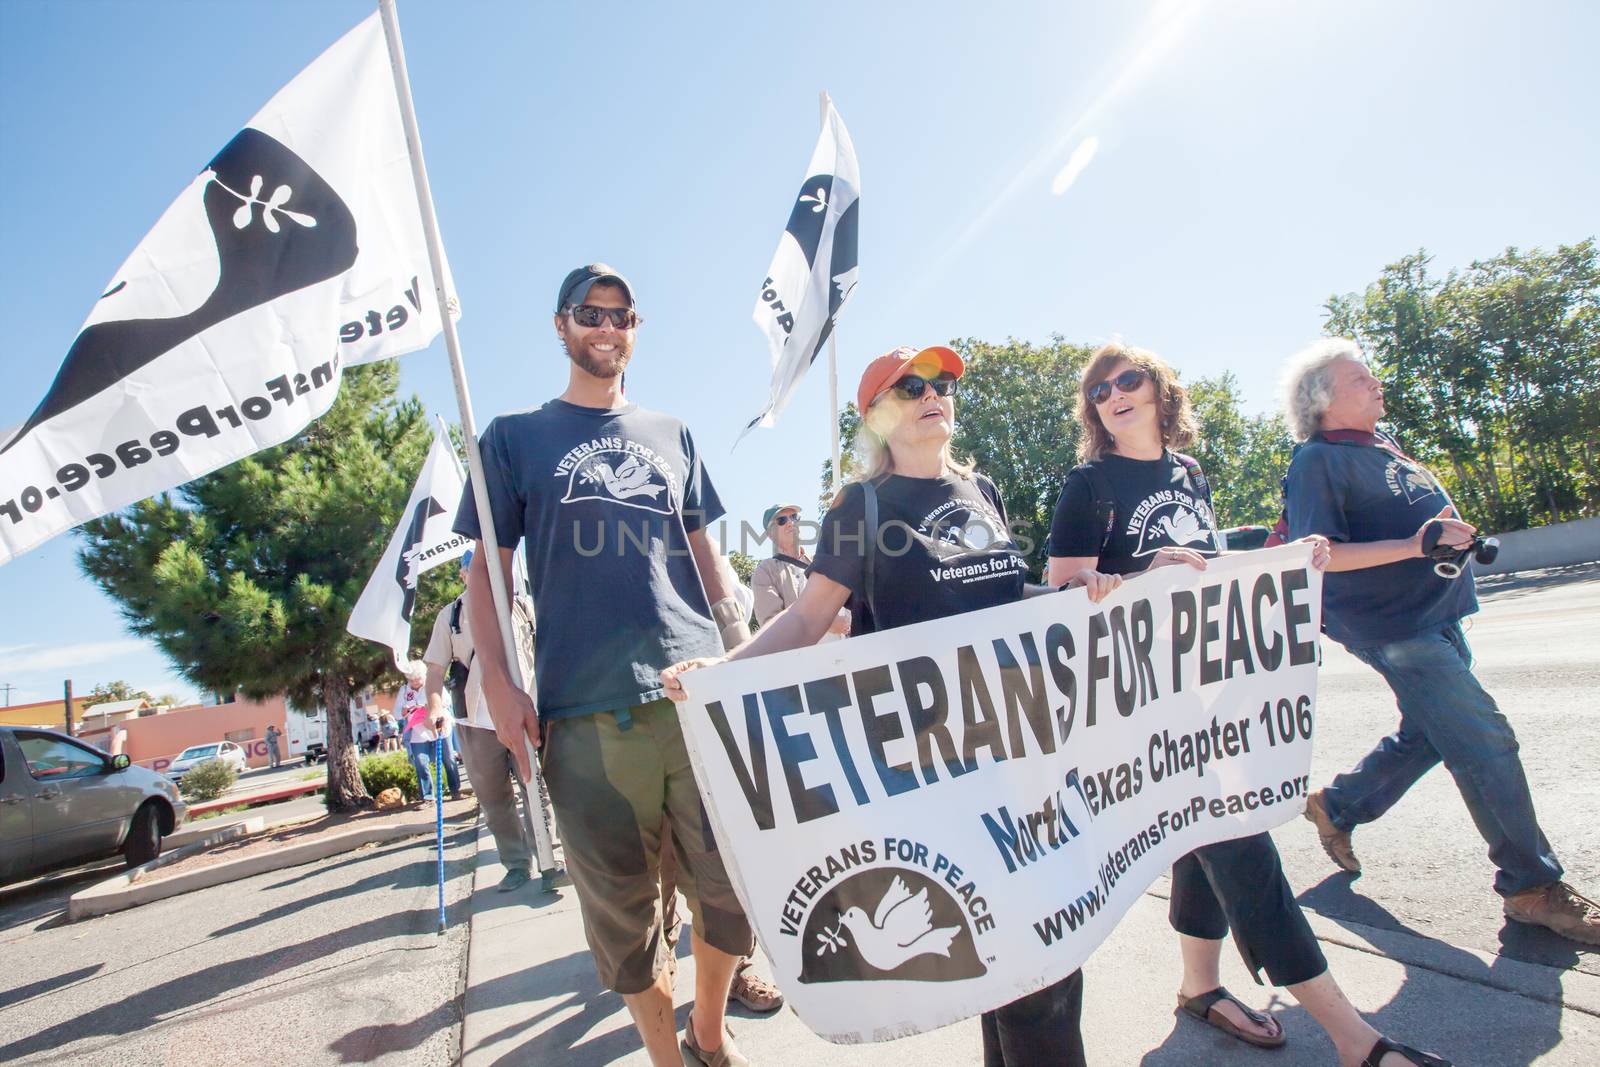 NOGALES, AZ - OCTOBER 08: Veterans for Peace group with flags and banners at protest march near the US and Mexico border on October 08, 2016 in Nogales, AZ, USA.